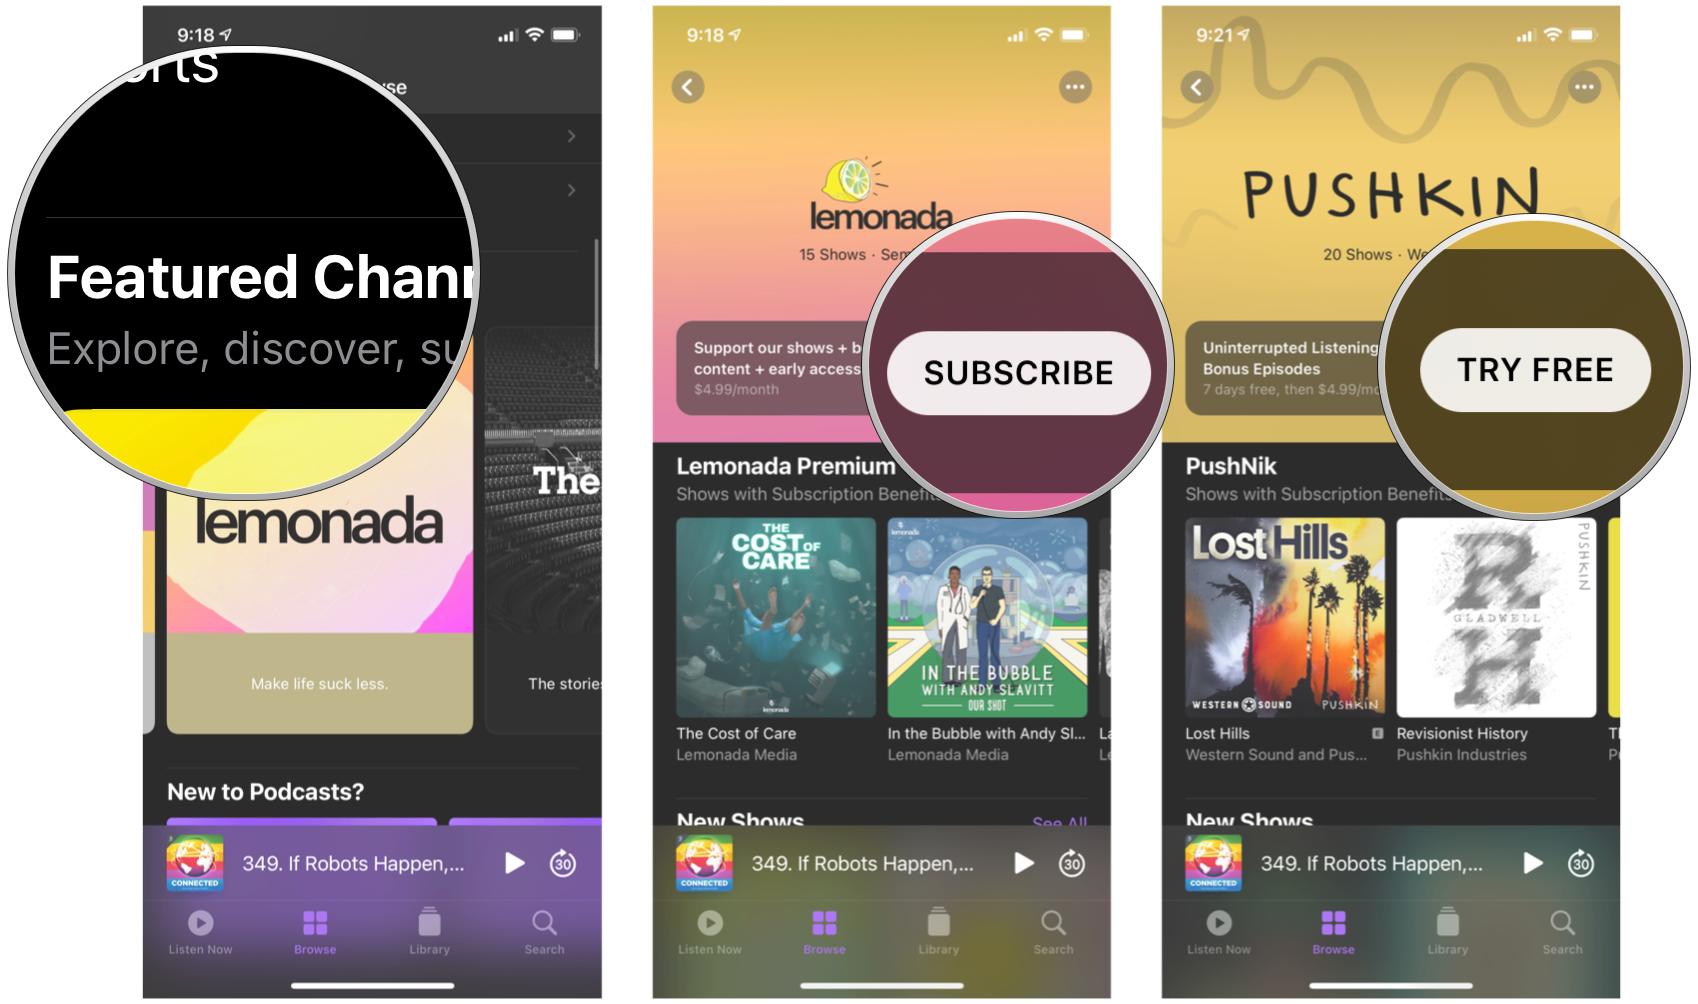 Subscribe to a podcast in the Podcasts app on iPhone by showing: Tap a channel with premium features, tap Subscribe or Try Free for a trial if available